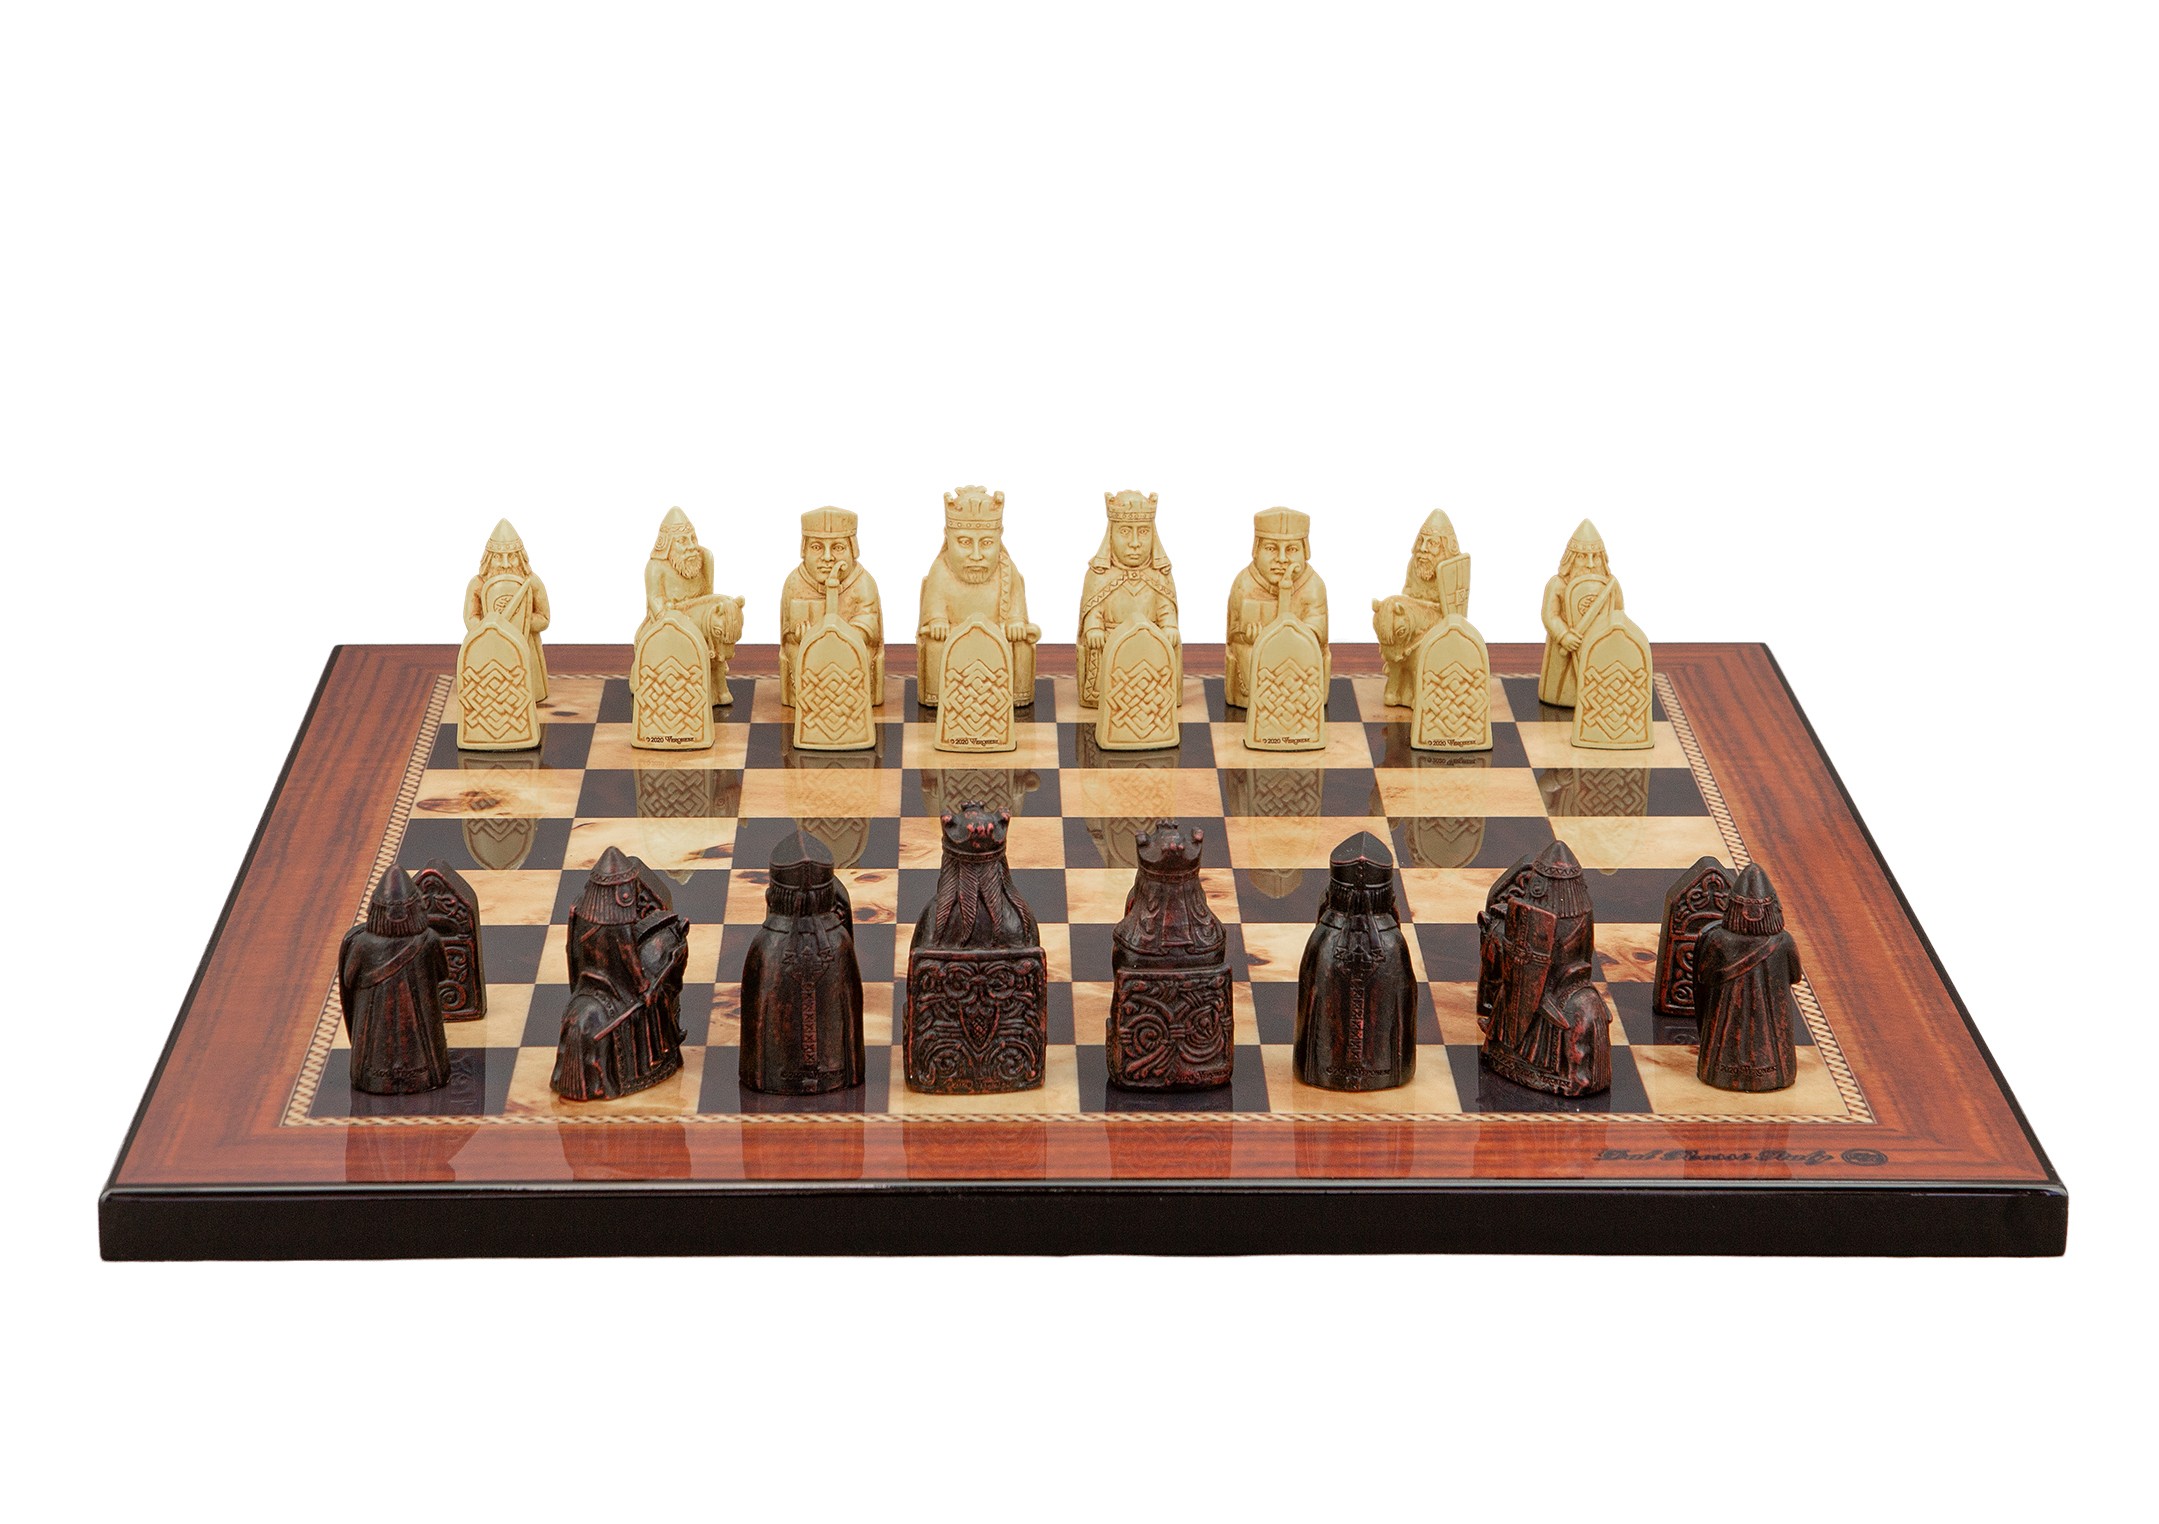 Dal Rossi Italy Isle of Lewis Chess Set on a Walnut Shiny Finish Chess Board 40cm